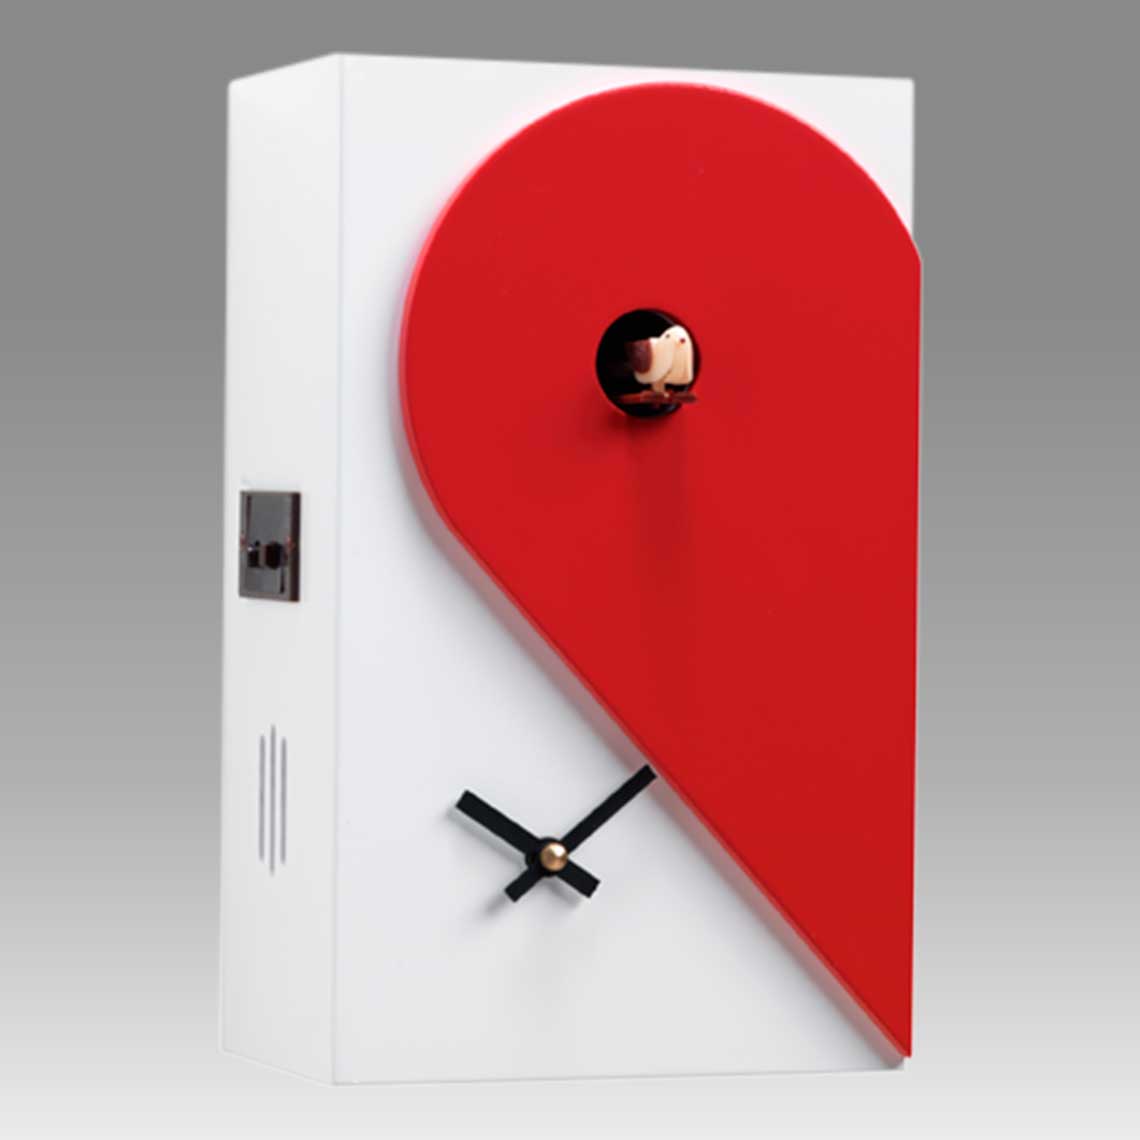 Modern cuckoo clock Art.loveme loveyou 2606 lacquered with acrilic color white with red heart